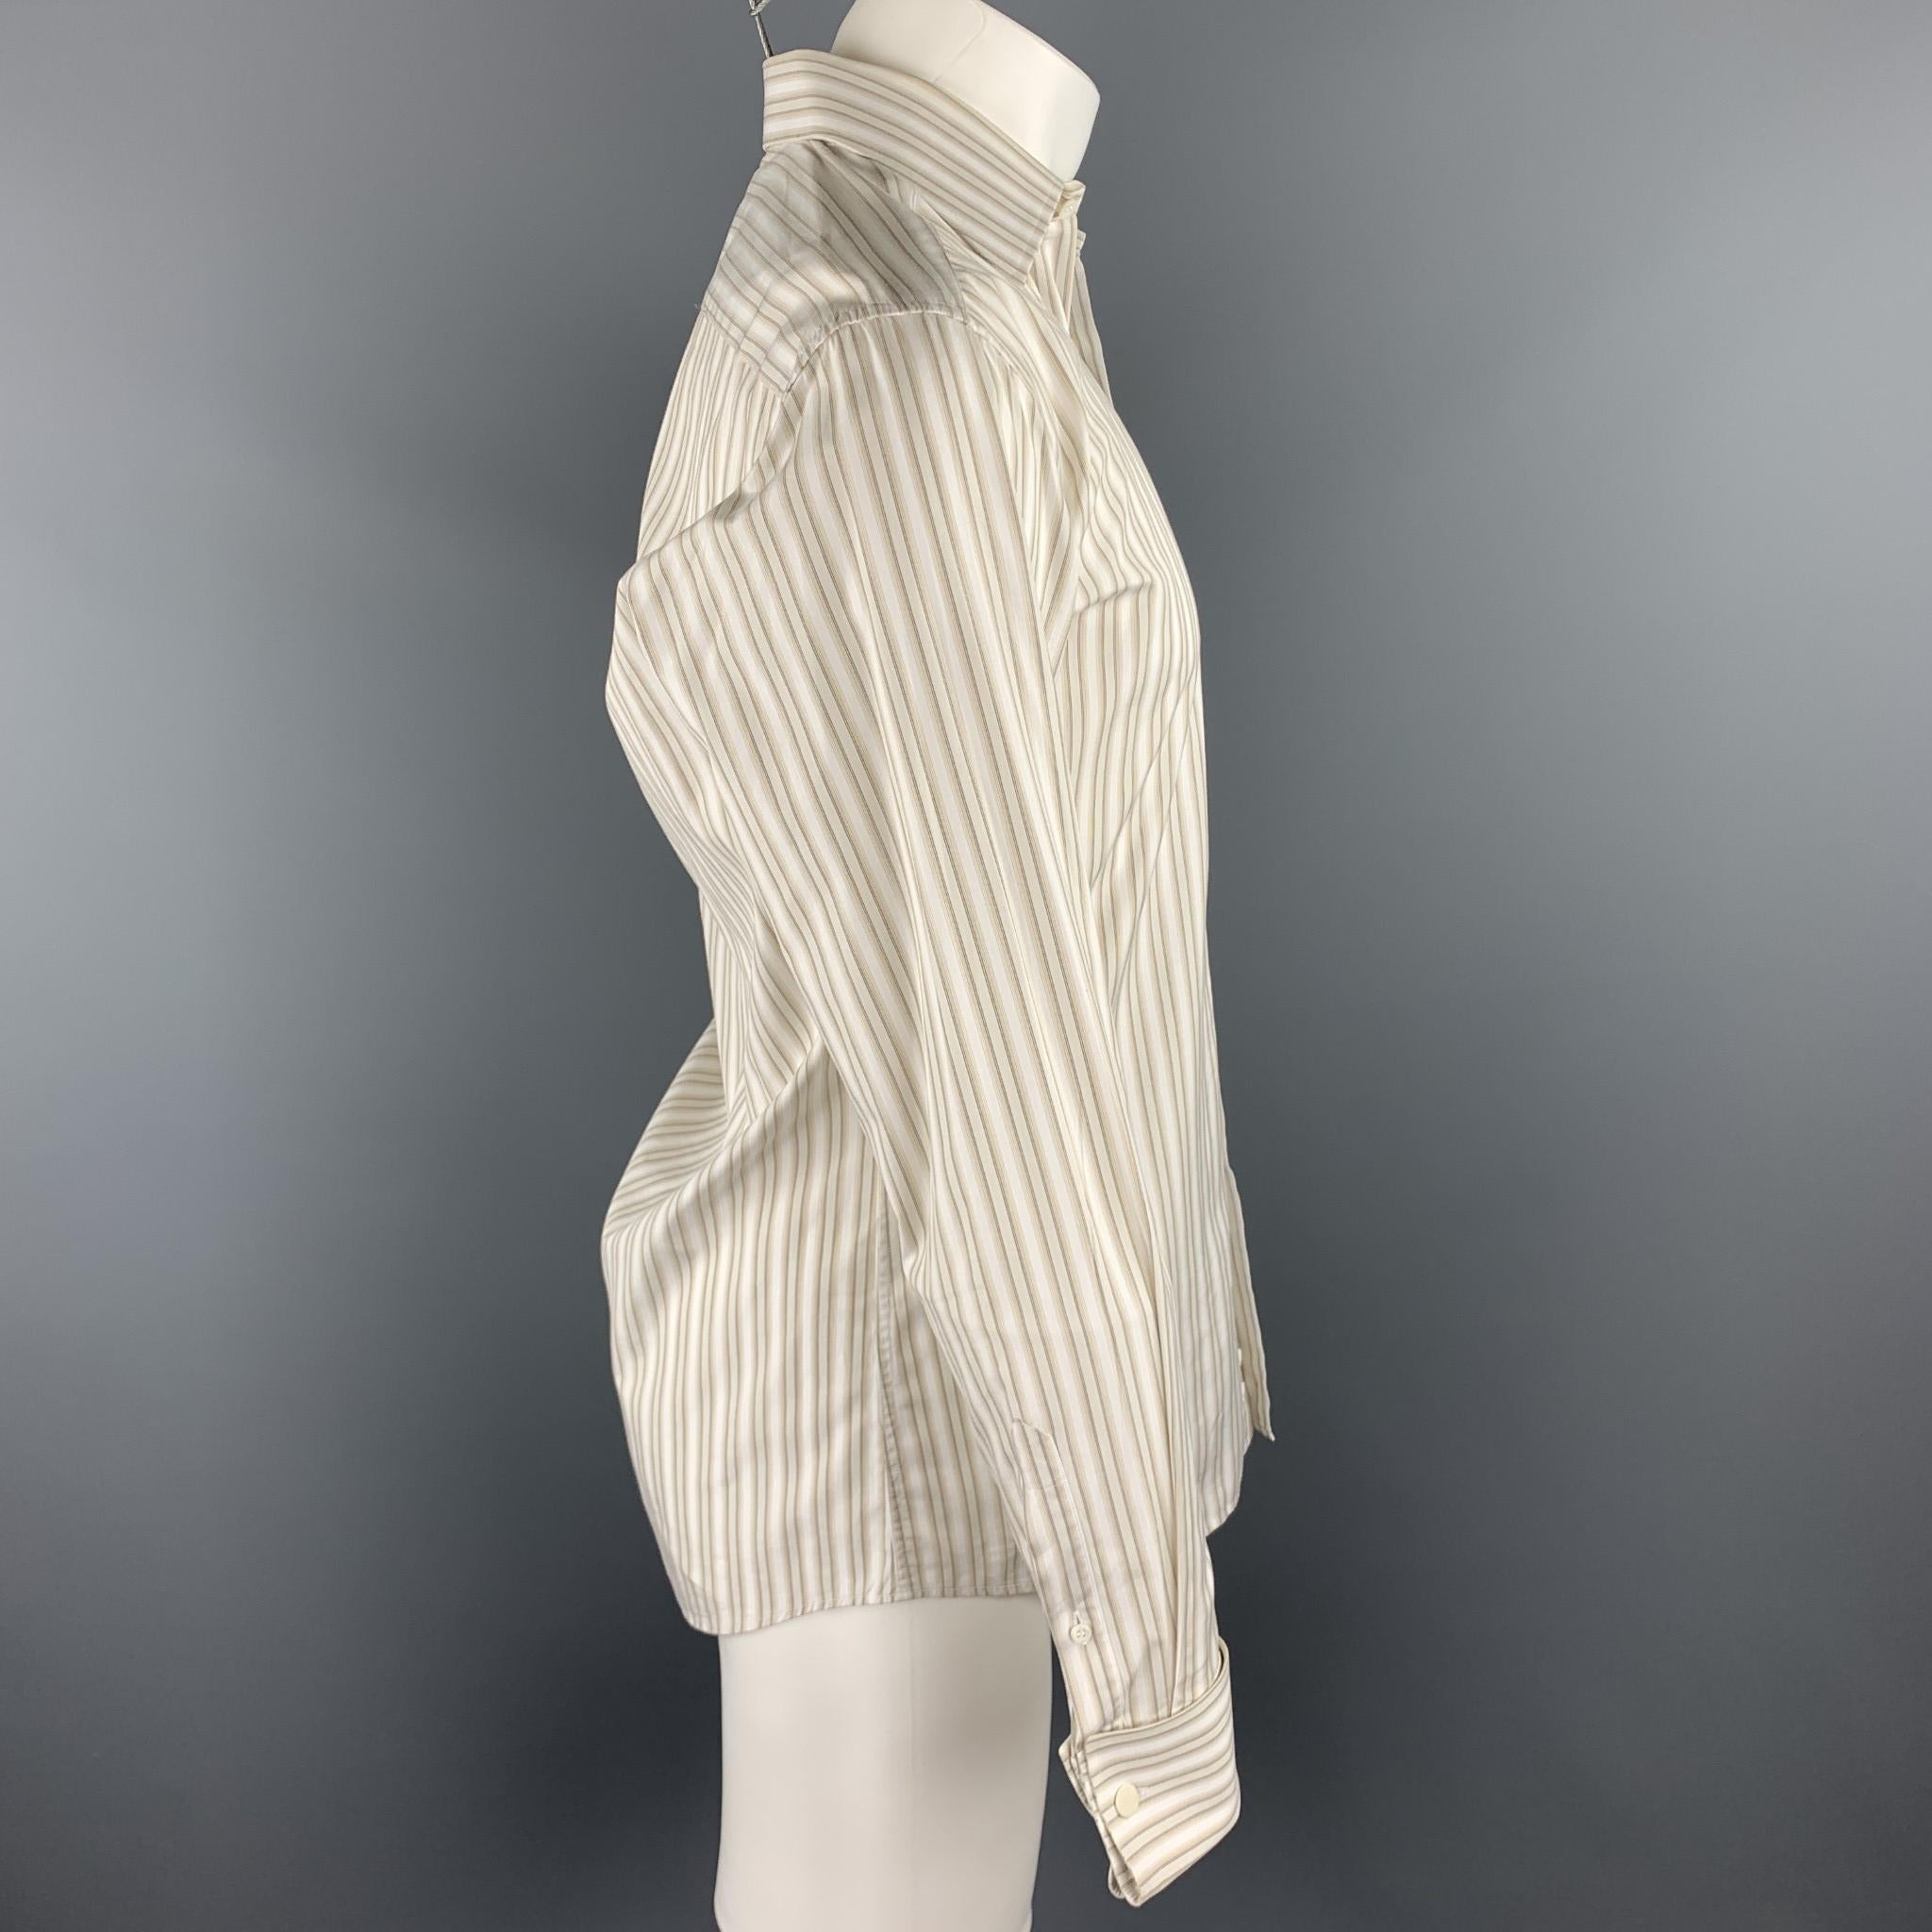 GUCCI long sleeve shirt comes in a beige stripe cotton featuring a button up style, french cuffs, and a spread collar. Cufflinks not included. Discoloration on collar. As-Is. Made in Italy.

Good Pre-Owned Condition.
Marked: